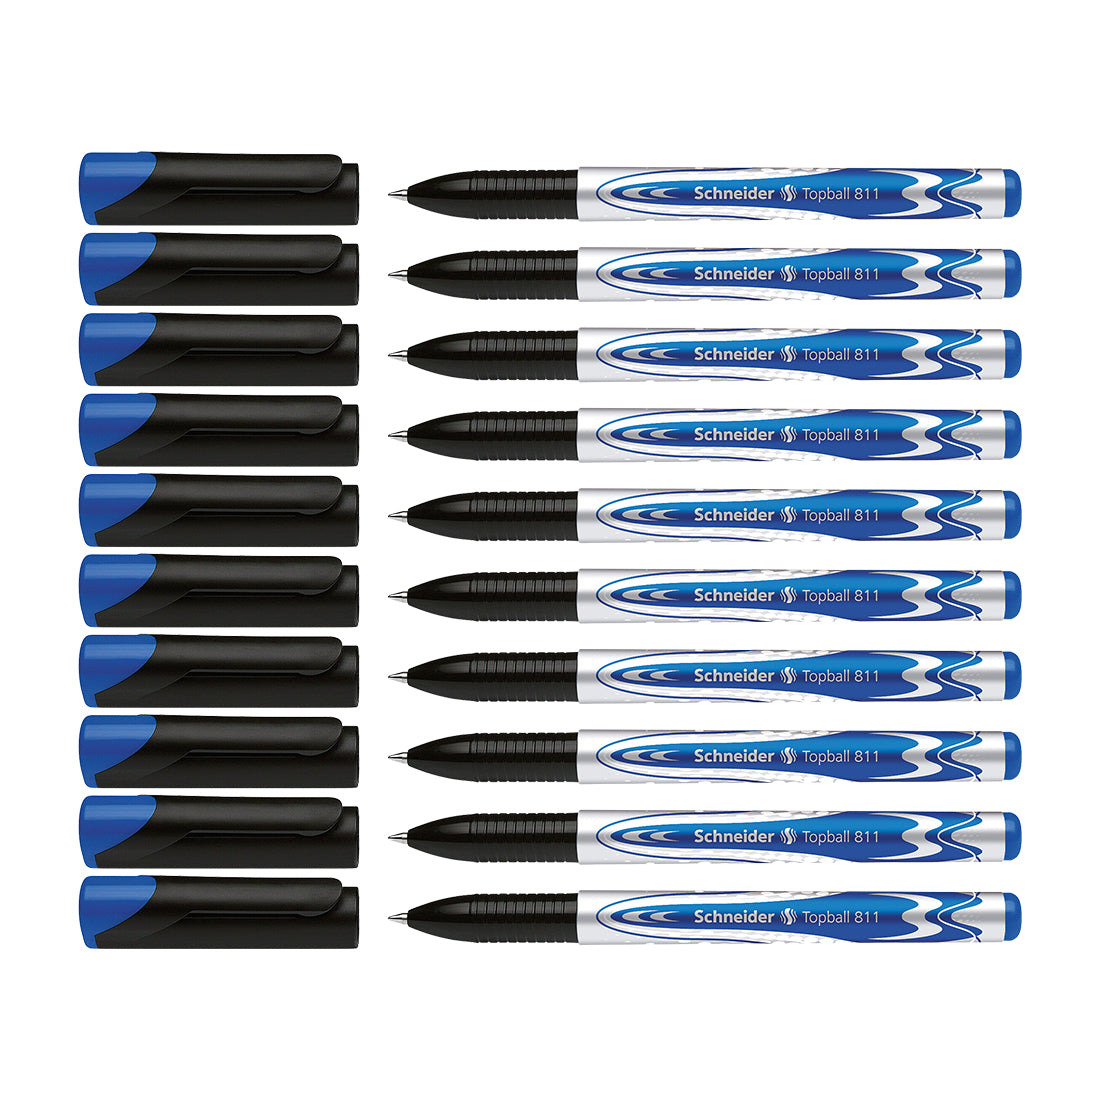 Topball 811 Rollerball 0.5mm, Box of 10#ink-colour_blue